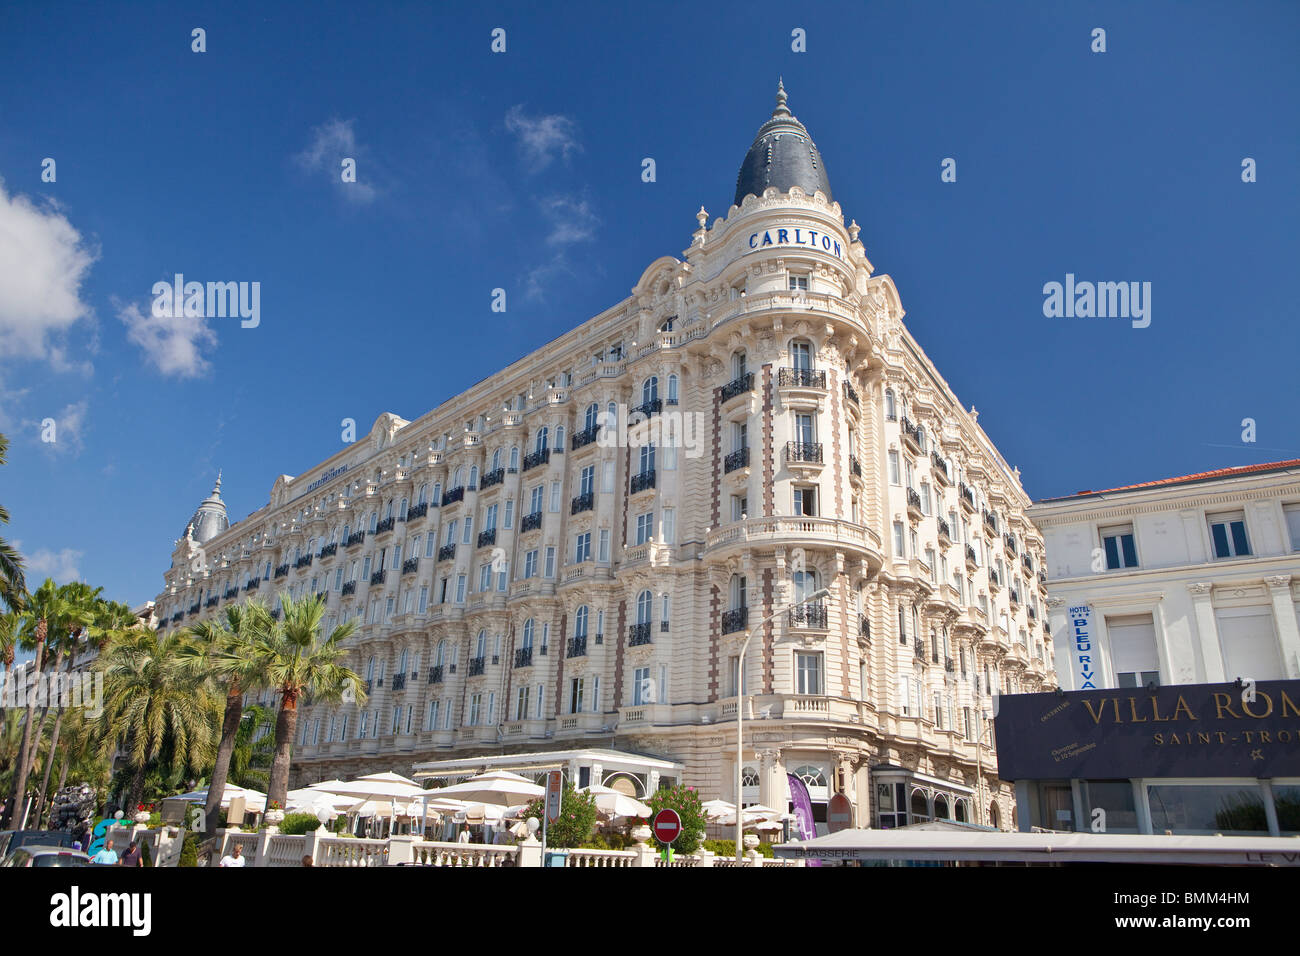 The luxurious, Carlton Hotel on the Croisette, Cannes, France, Europe. Stock Photo